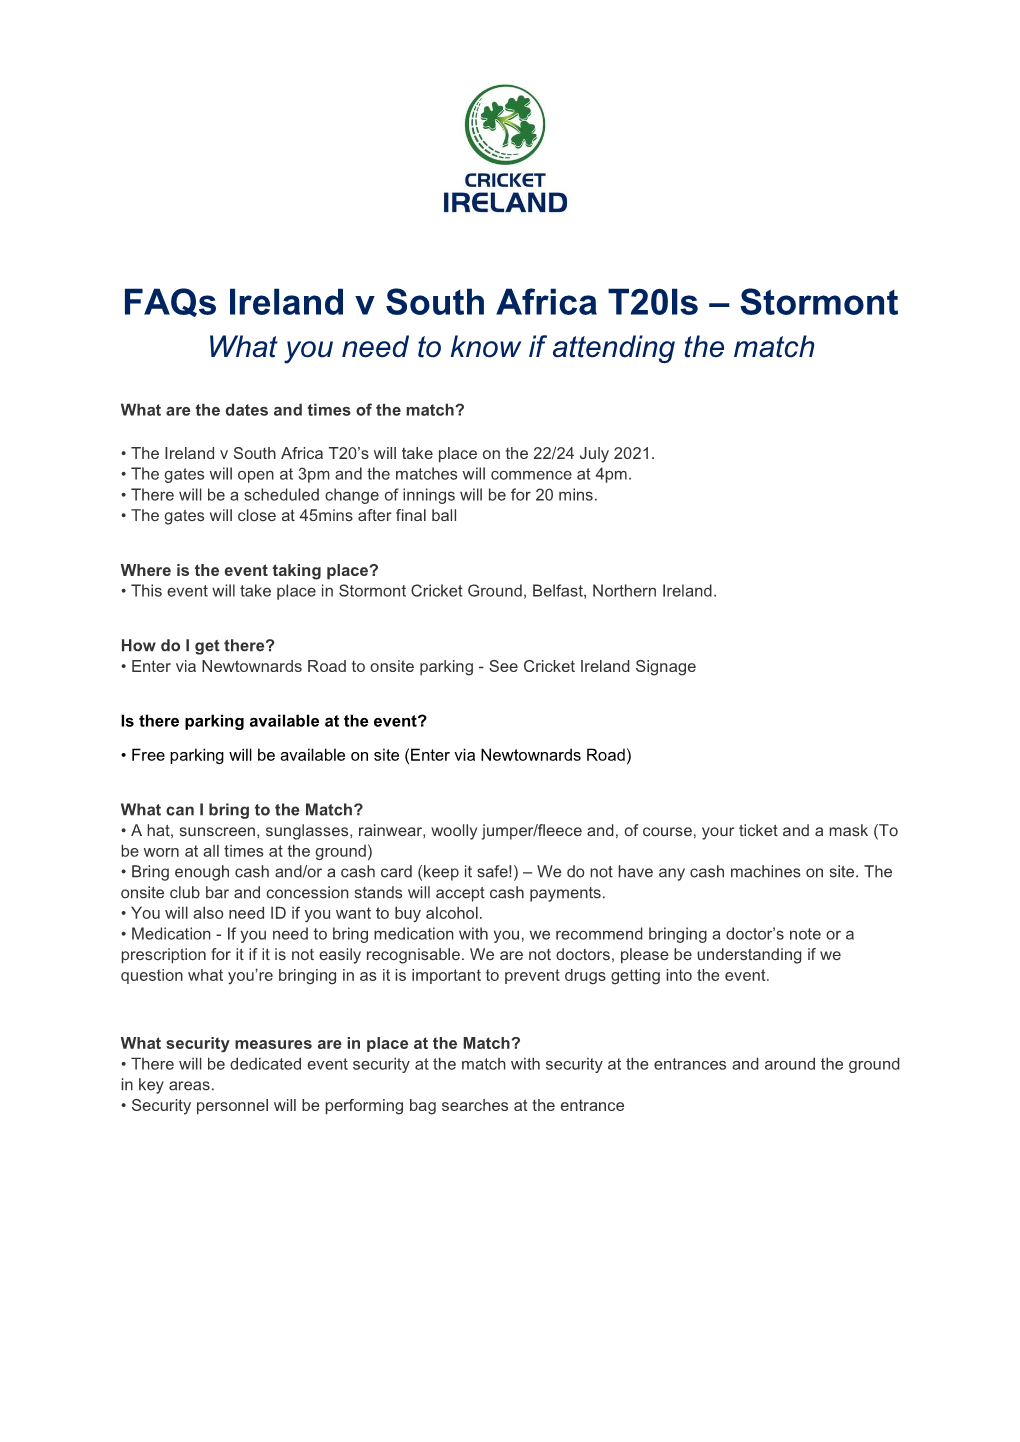 Faqs Ireland V South Africa T20is – Stormont What You Need to Know If Attending the Match